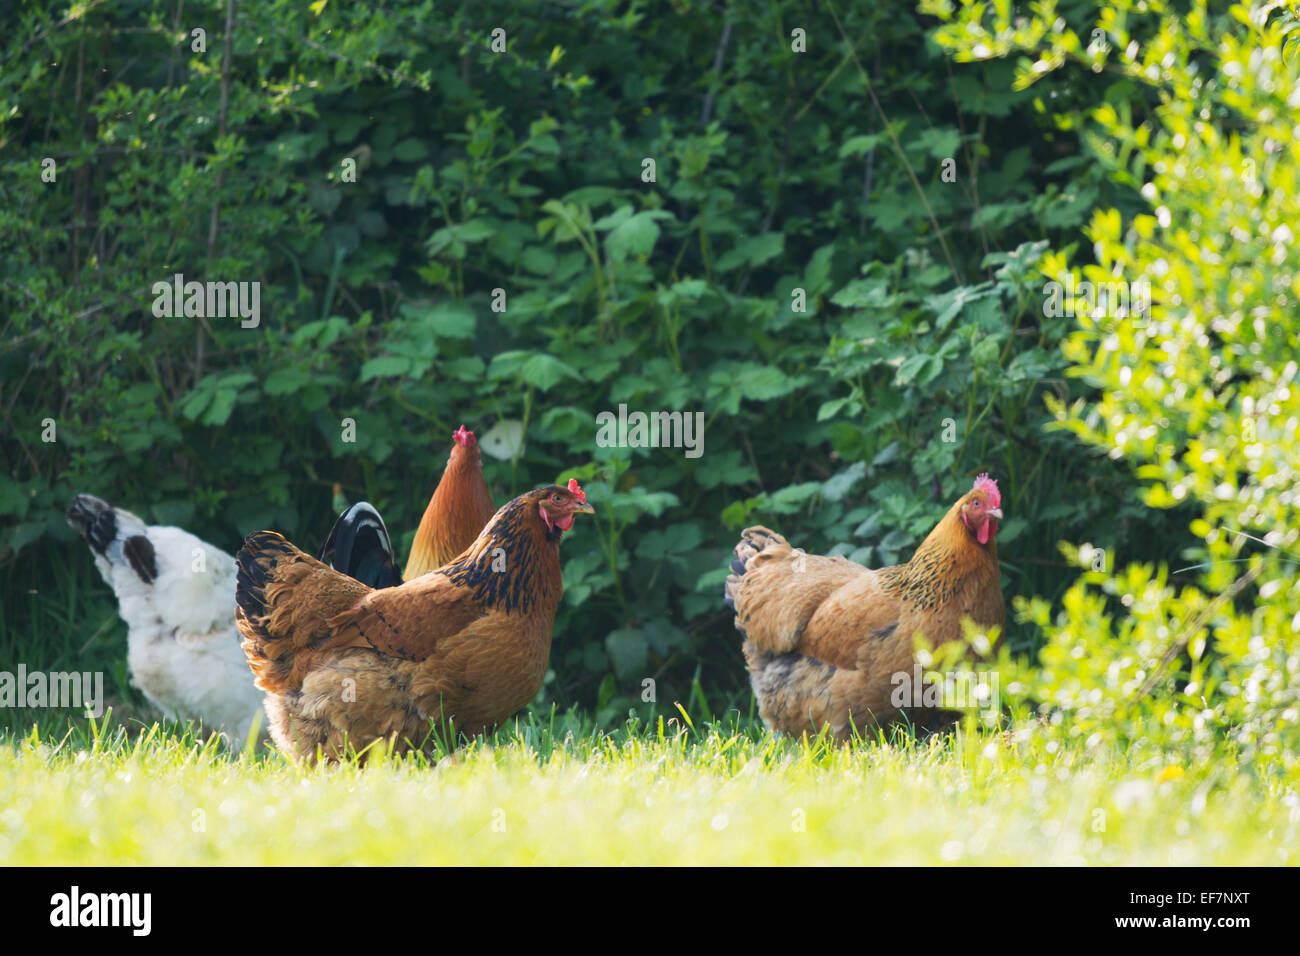 Rooster and chicken walking in nature environment Stock Photo - Alamy